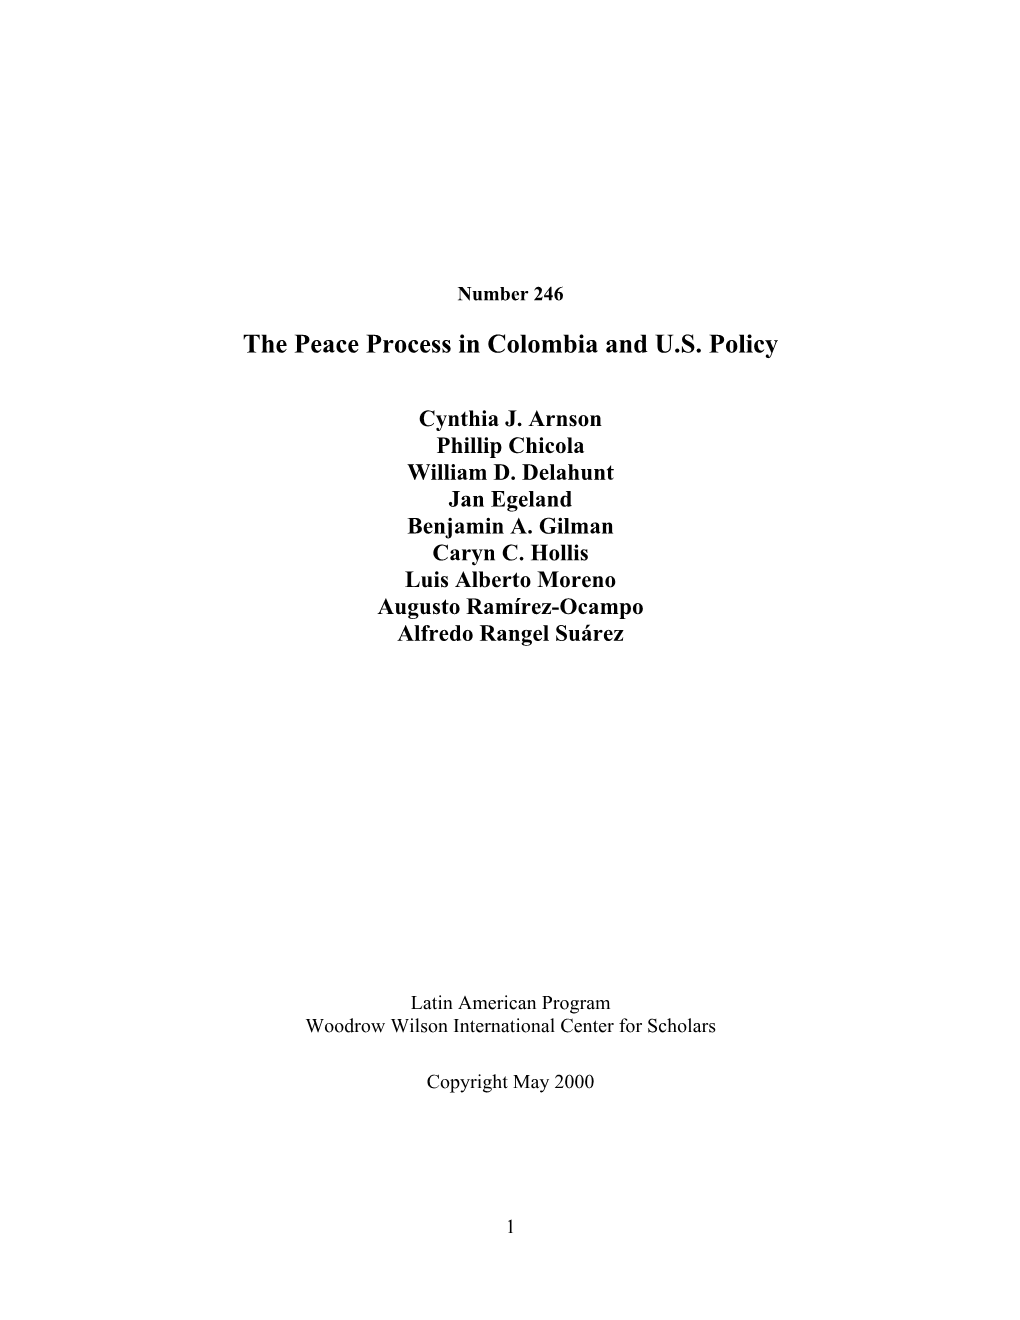 The Peace Process in Colombia and U.S. Policy